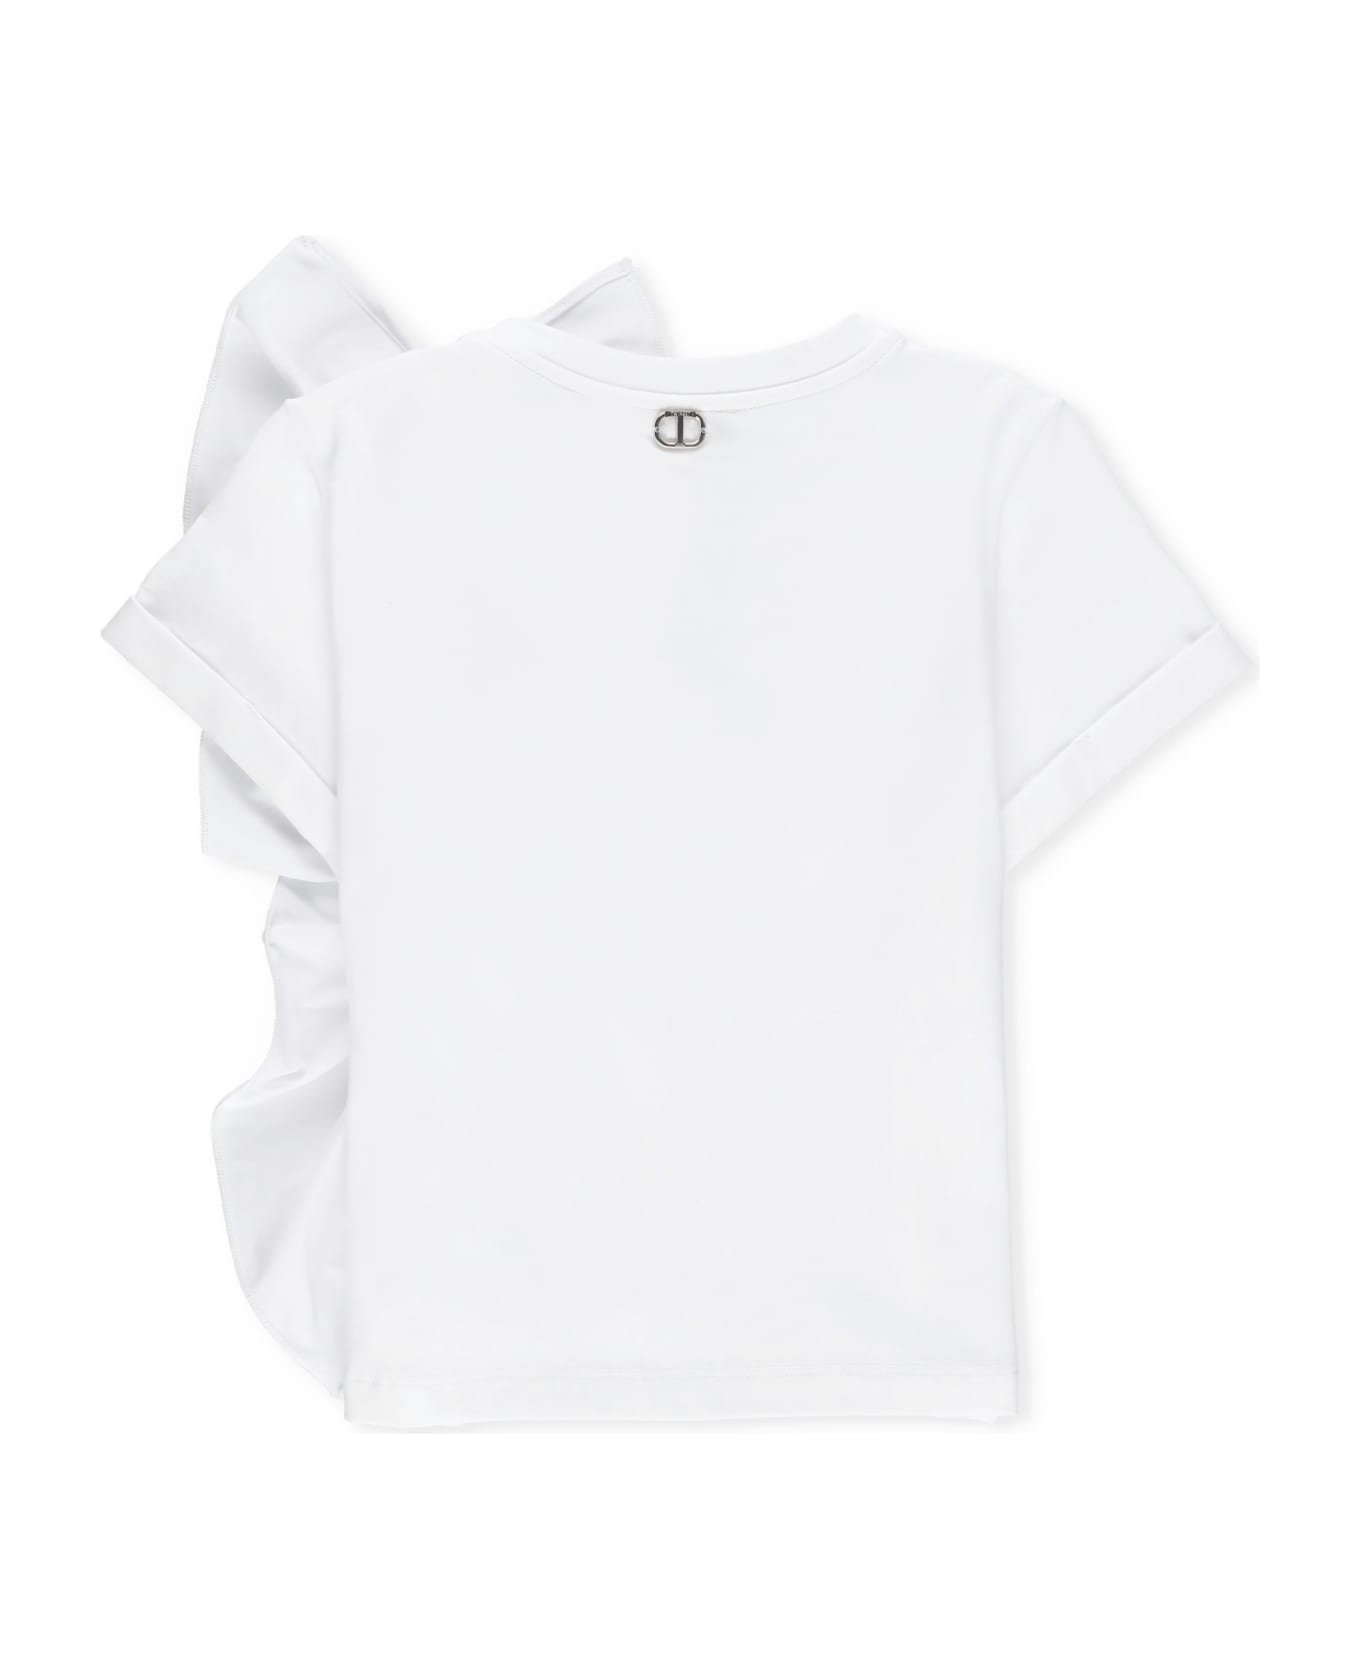 TwinSet T-shirt With Volant - White